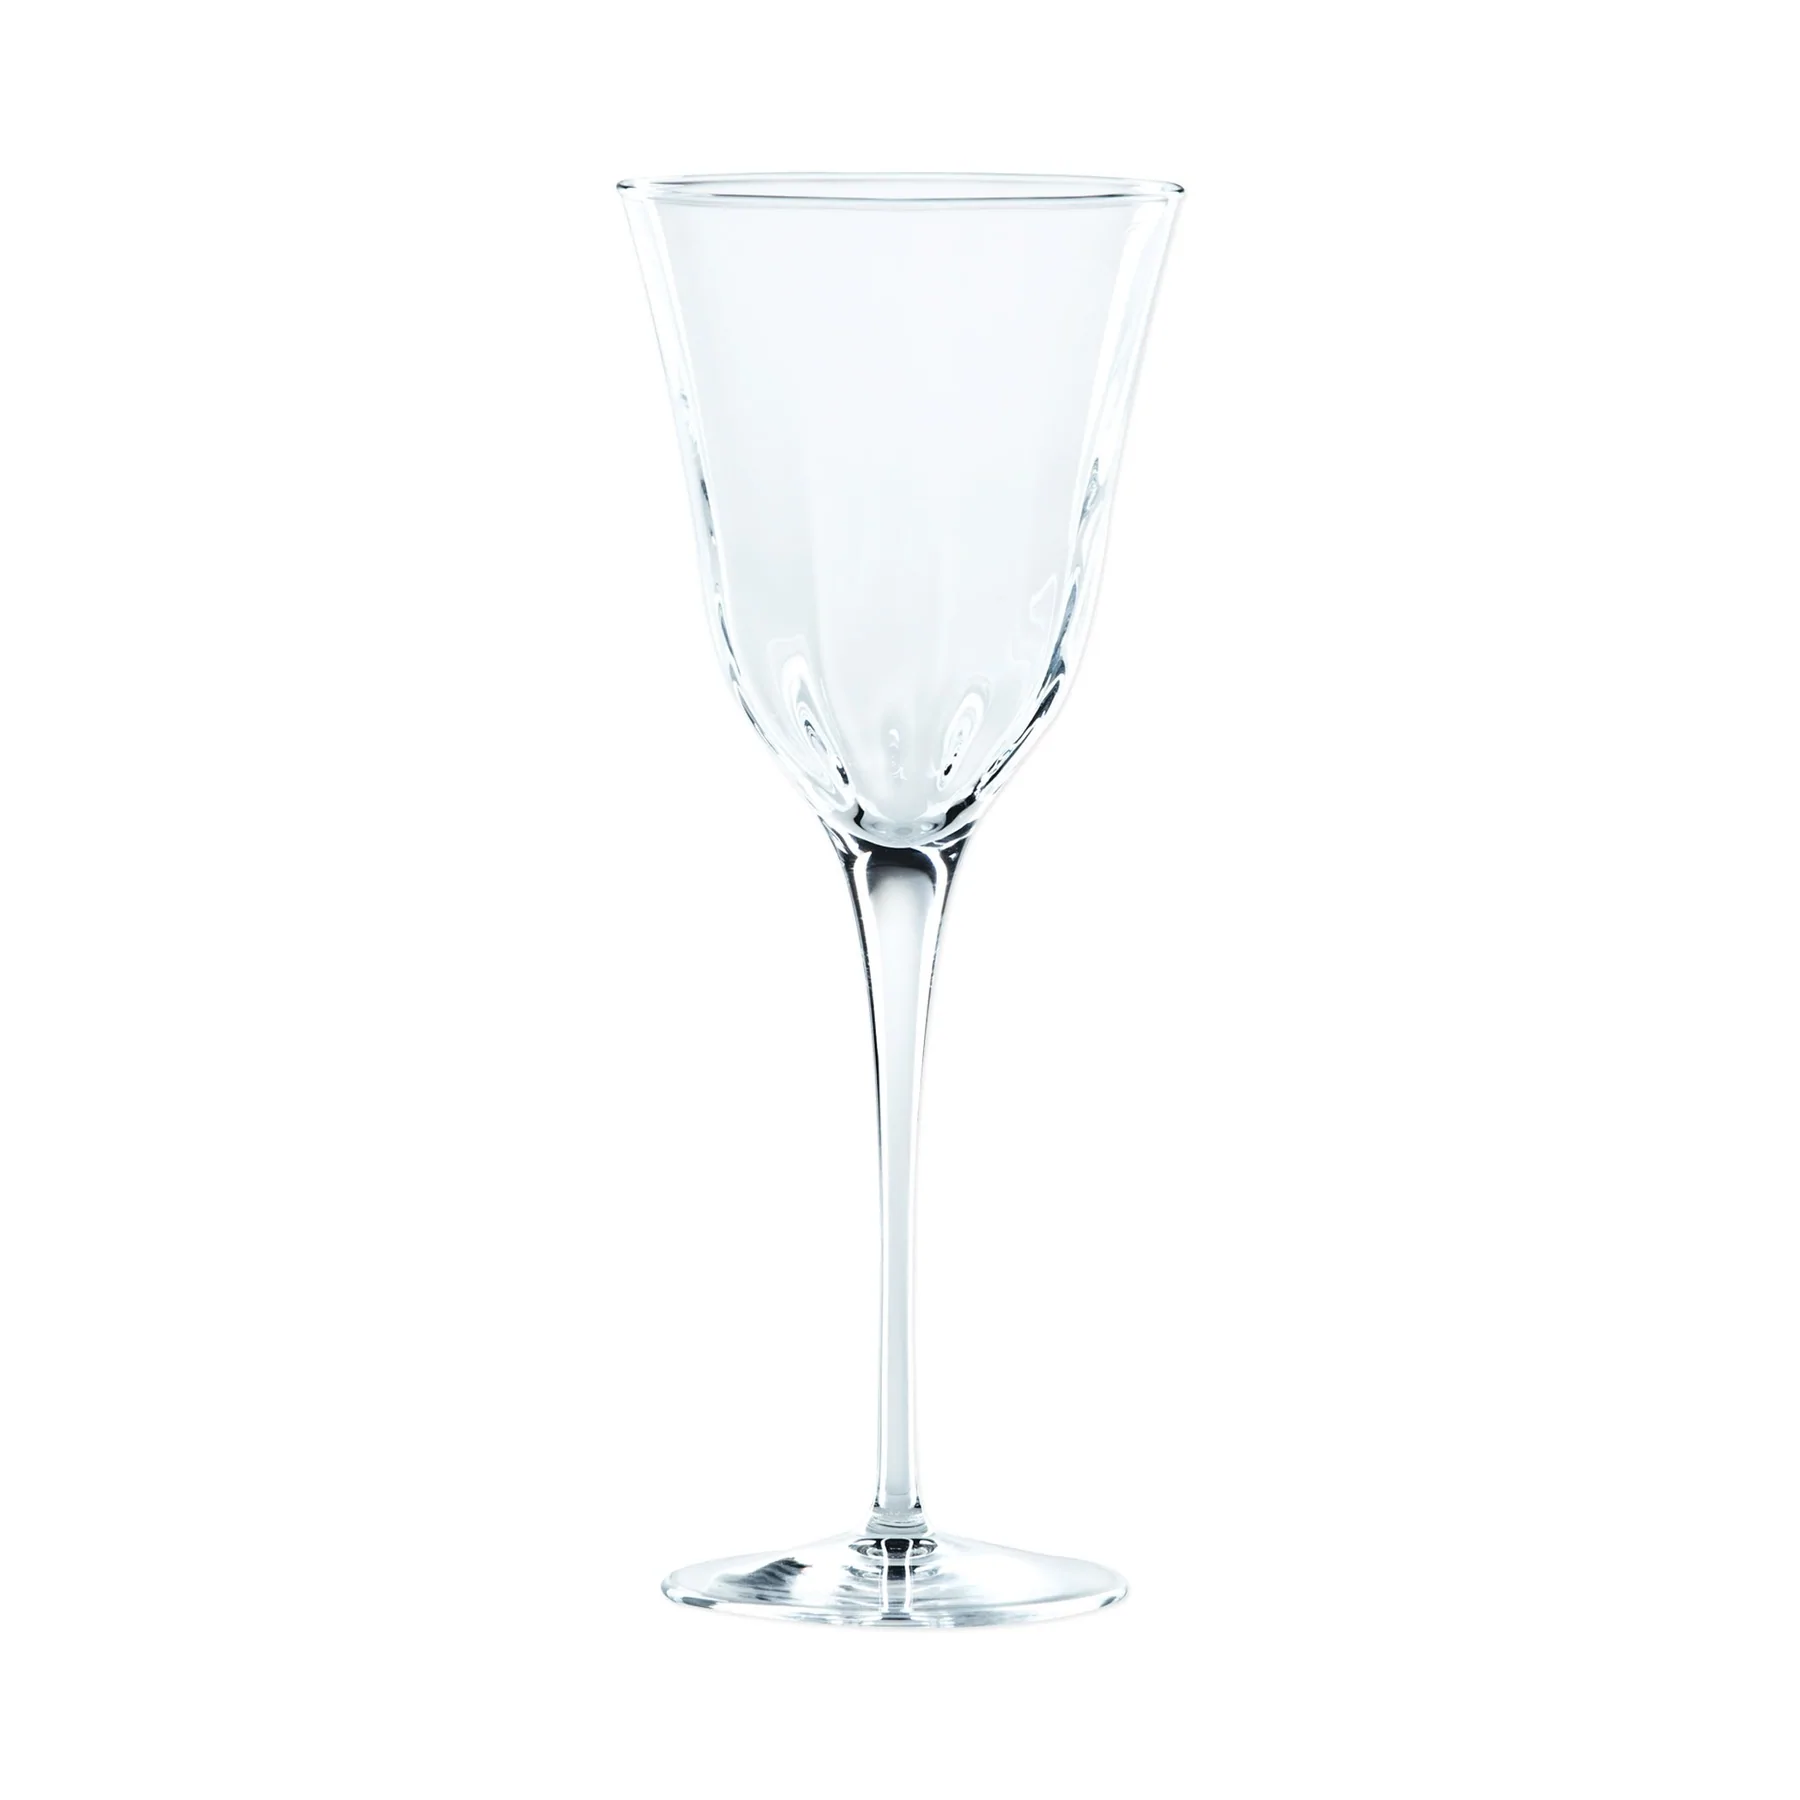 Elegant lines and a substantial weight give the sense of timeless crystal in the contemporary tableware Optical Clear Wine Glass by Vietri.